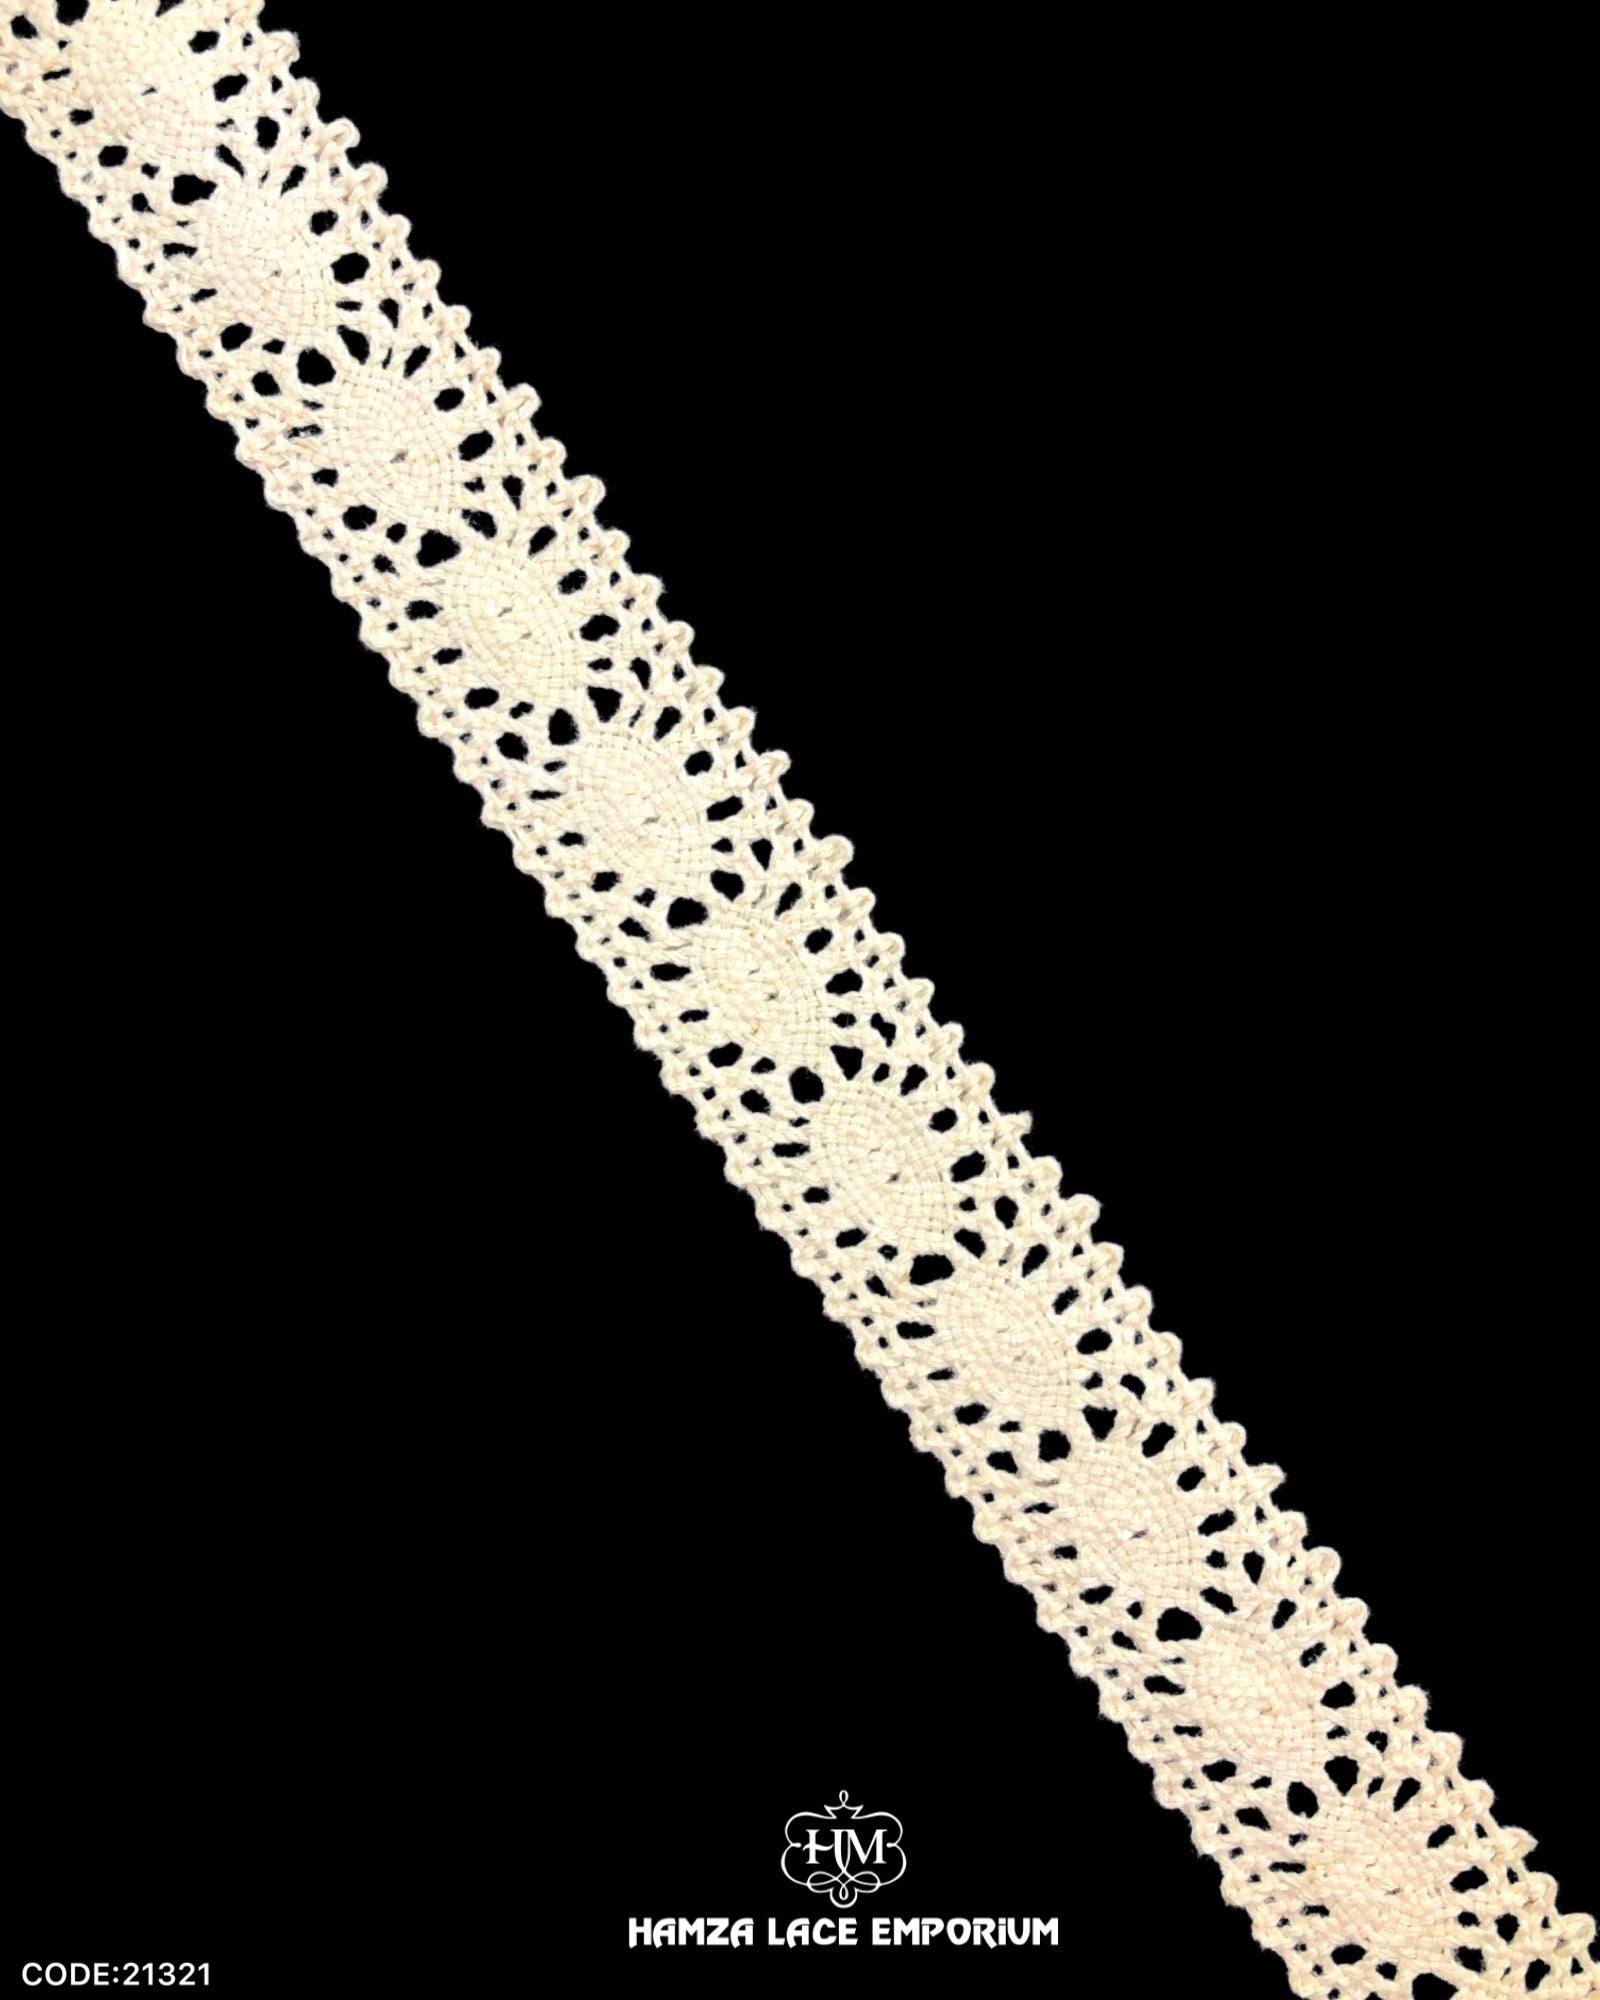 'Center Filling Crochet Lace 21321' with the brand name 'Hamza Lace' written at the bottom